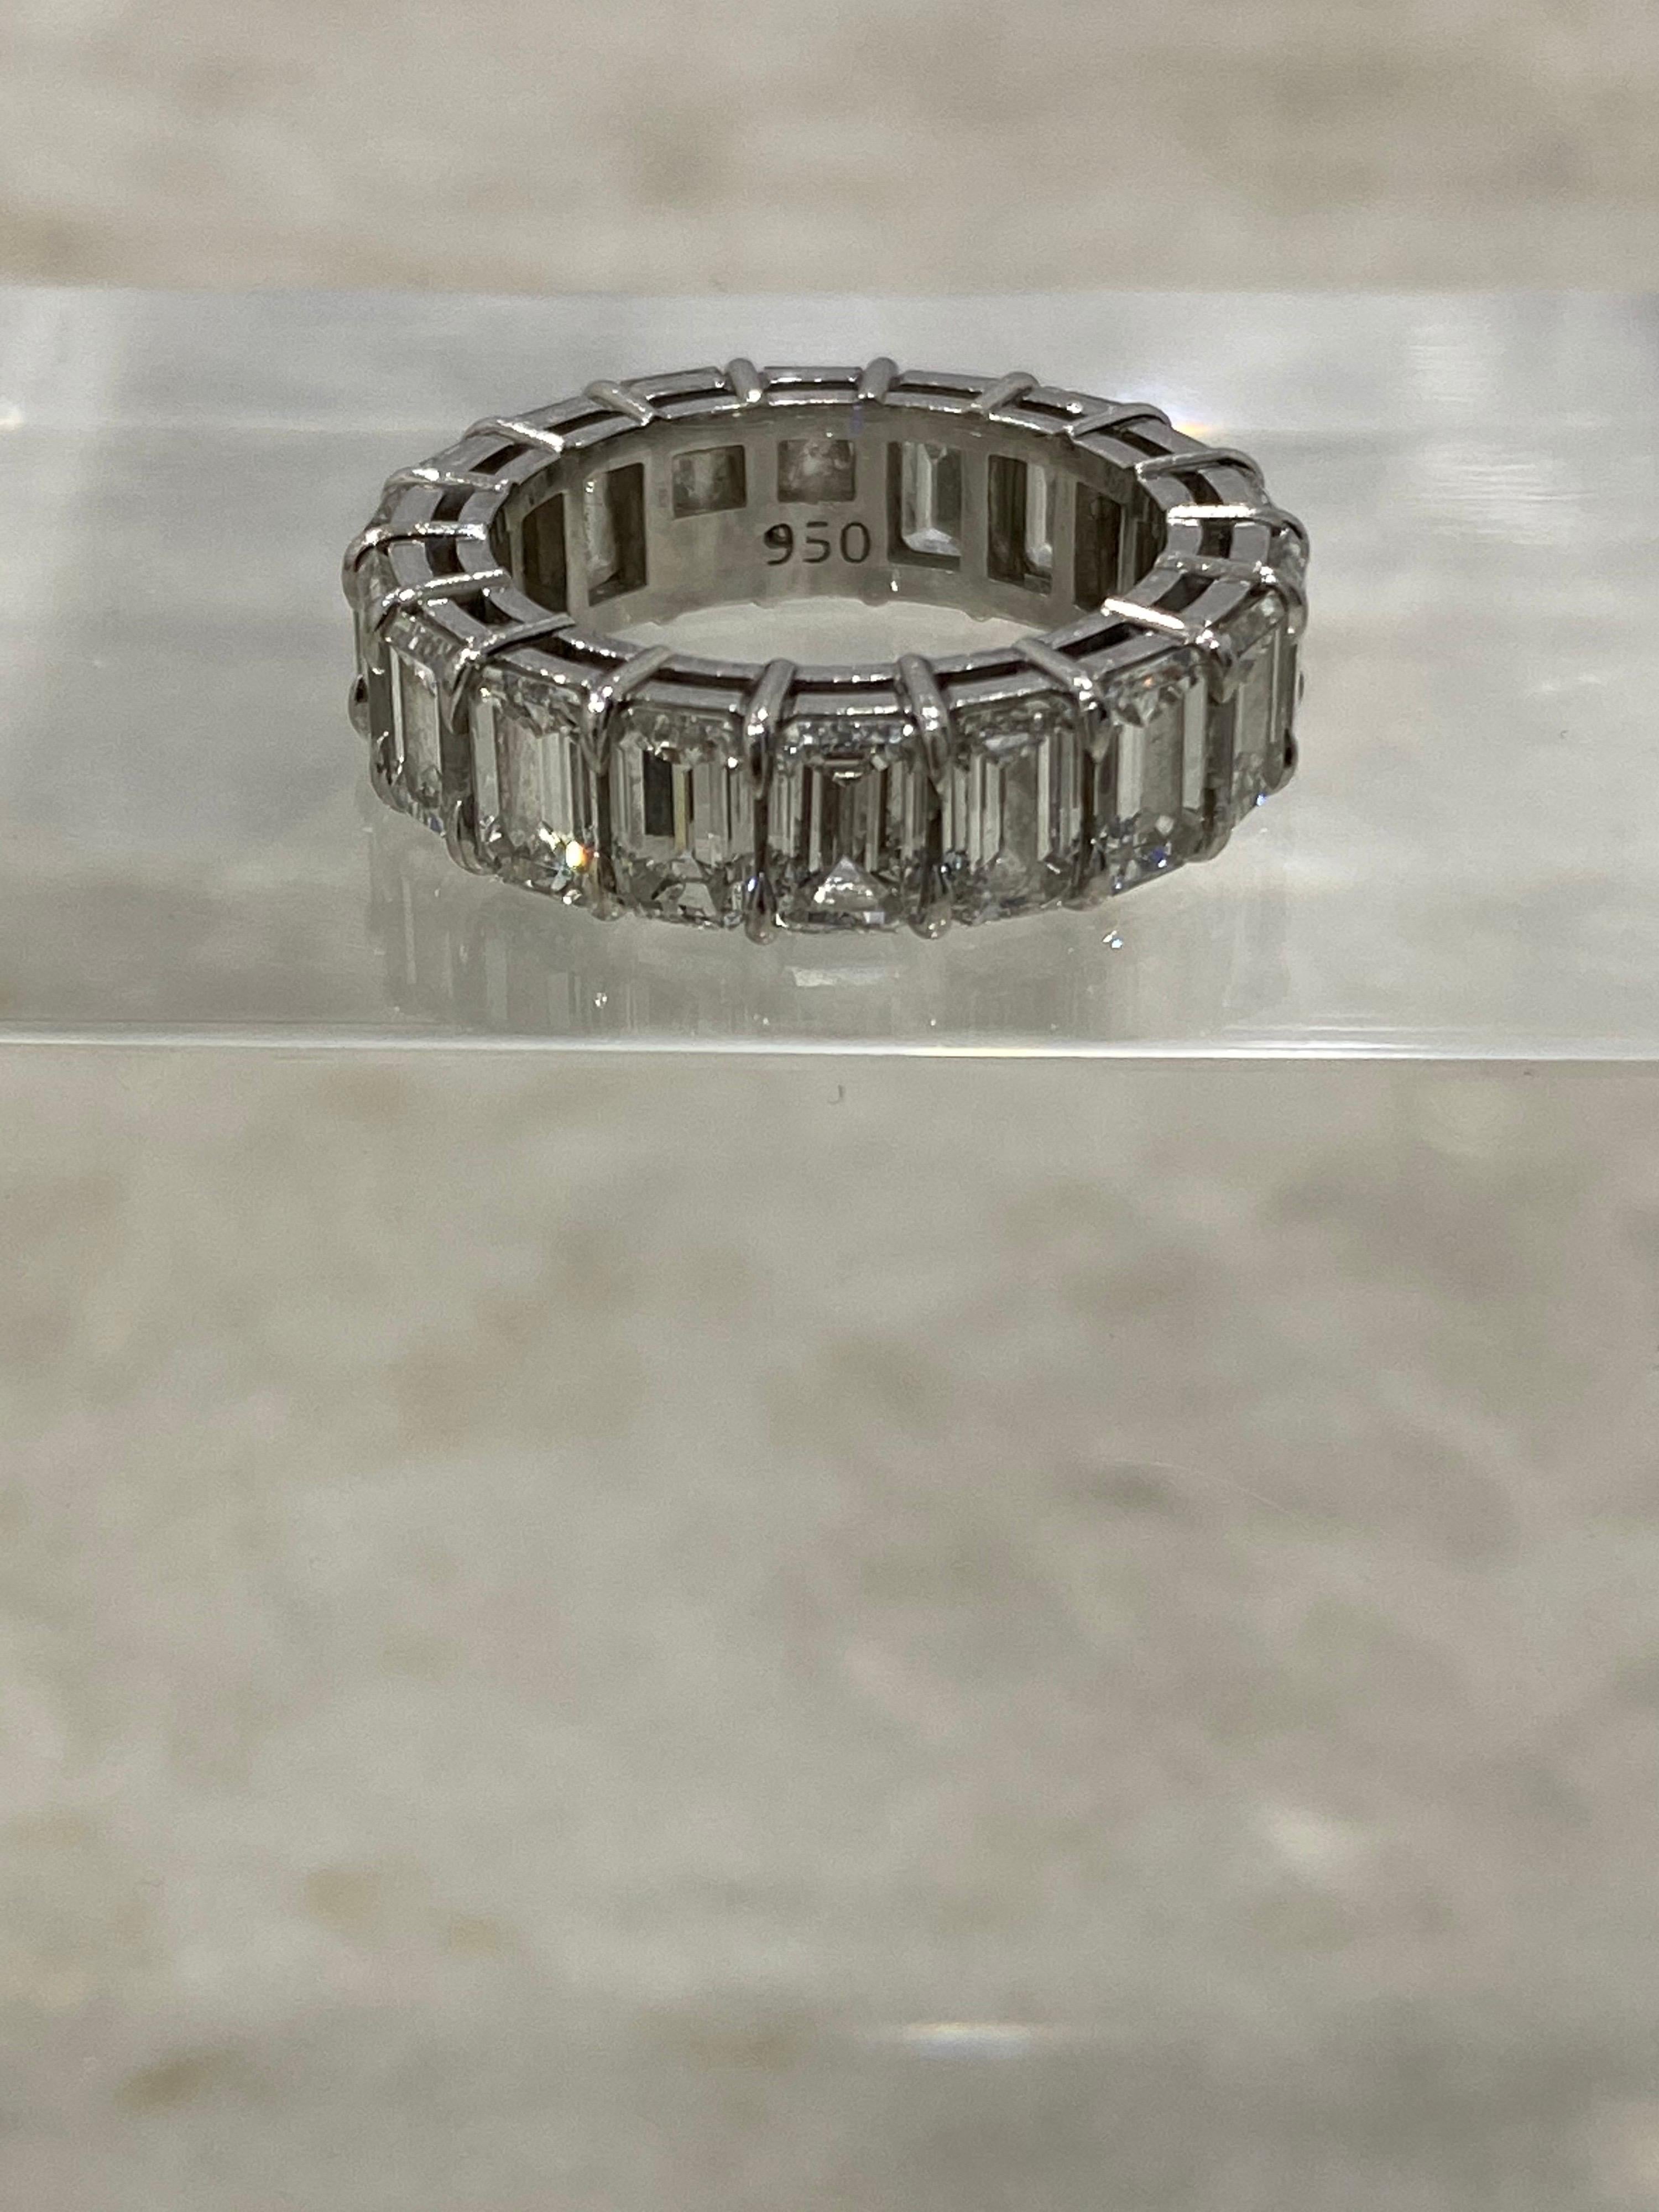 If your looking for a quality, forever style eternity band to cherish for years to come....Just having the diamonds with GIA inscriptions makes this a jewelry purchase that will always be desirable. 
18 emerald cut diamonds set in a custom platinum